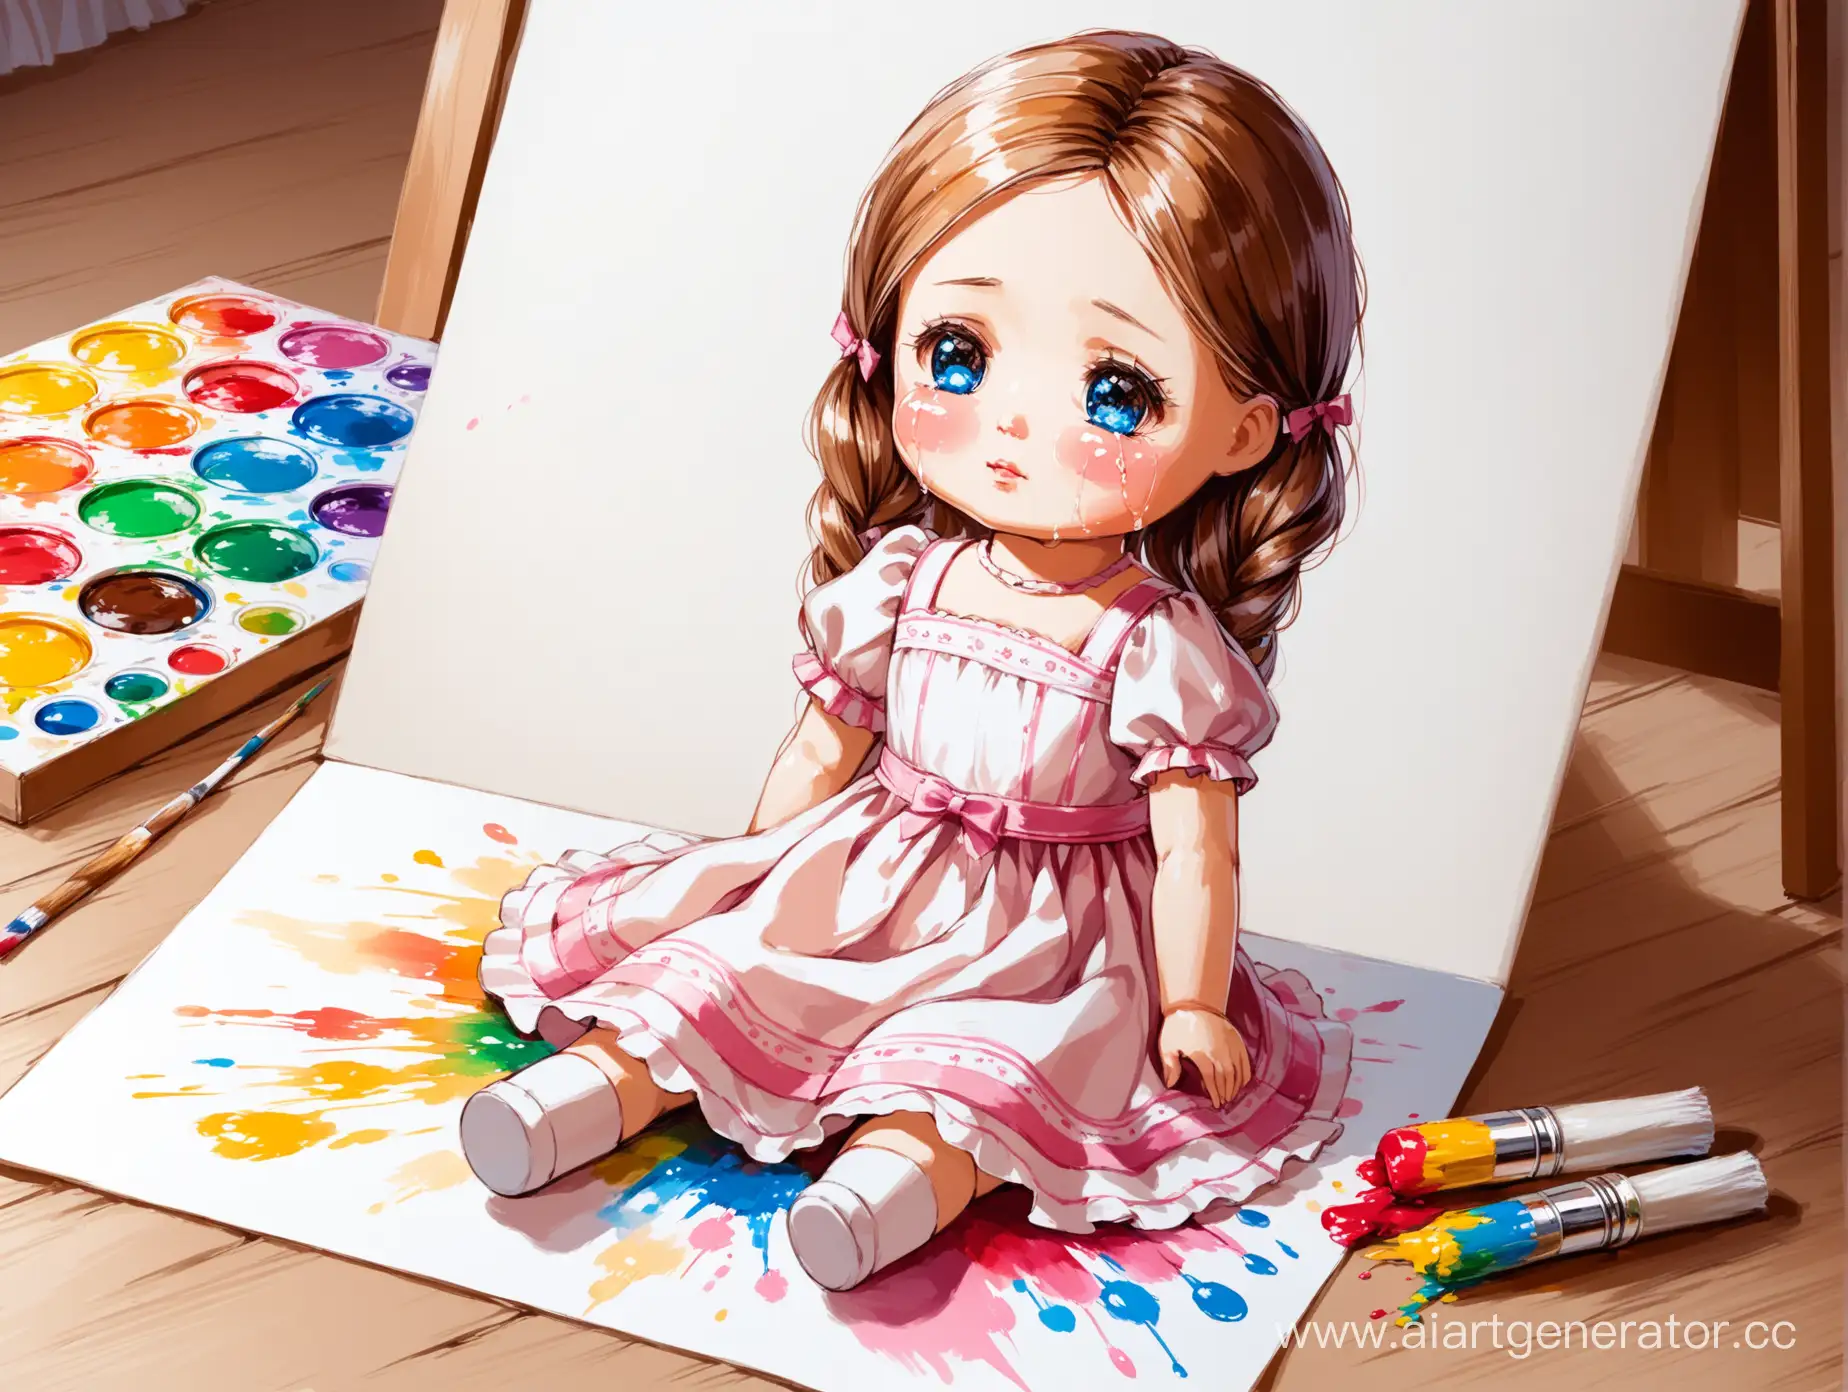 Lonely-Doll-Crying-Illustration-of-Emotional-Expression-in-Painted-Style